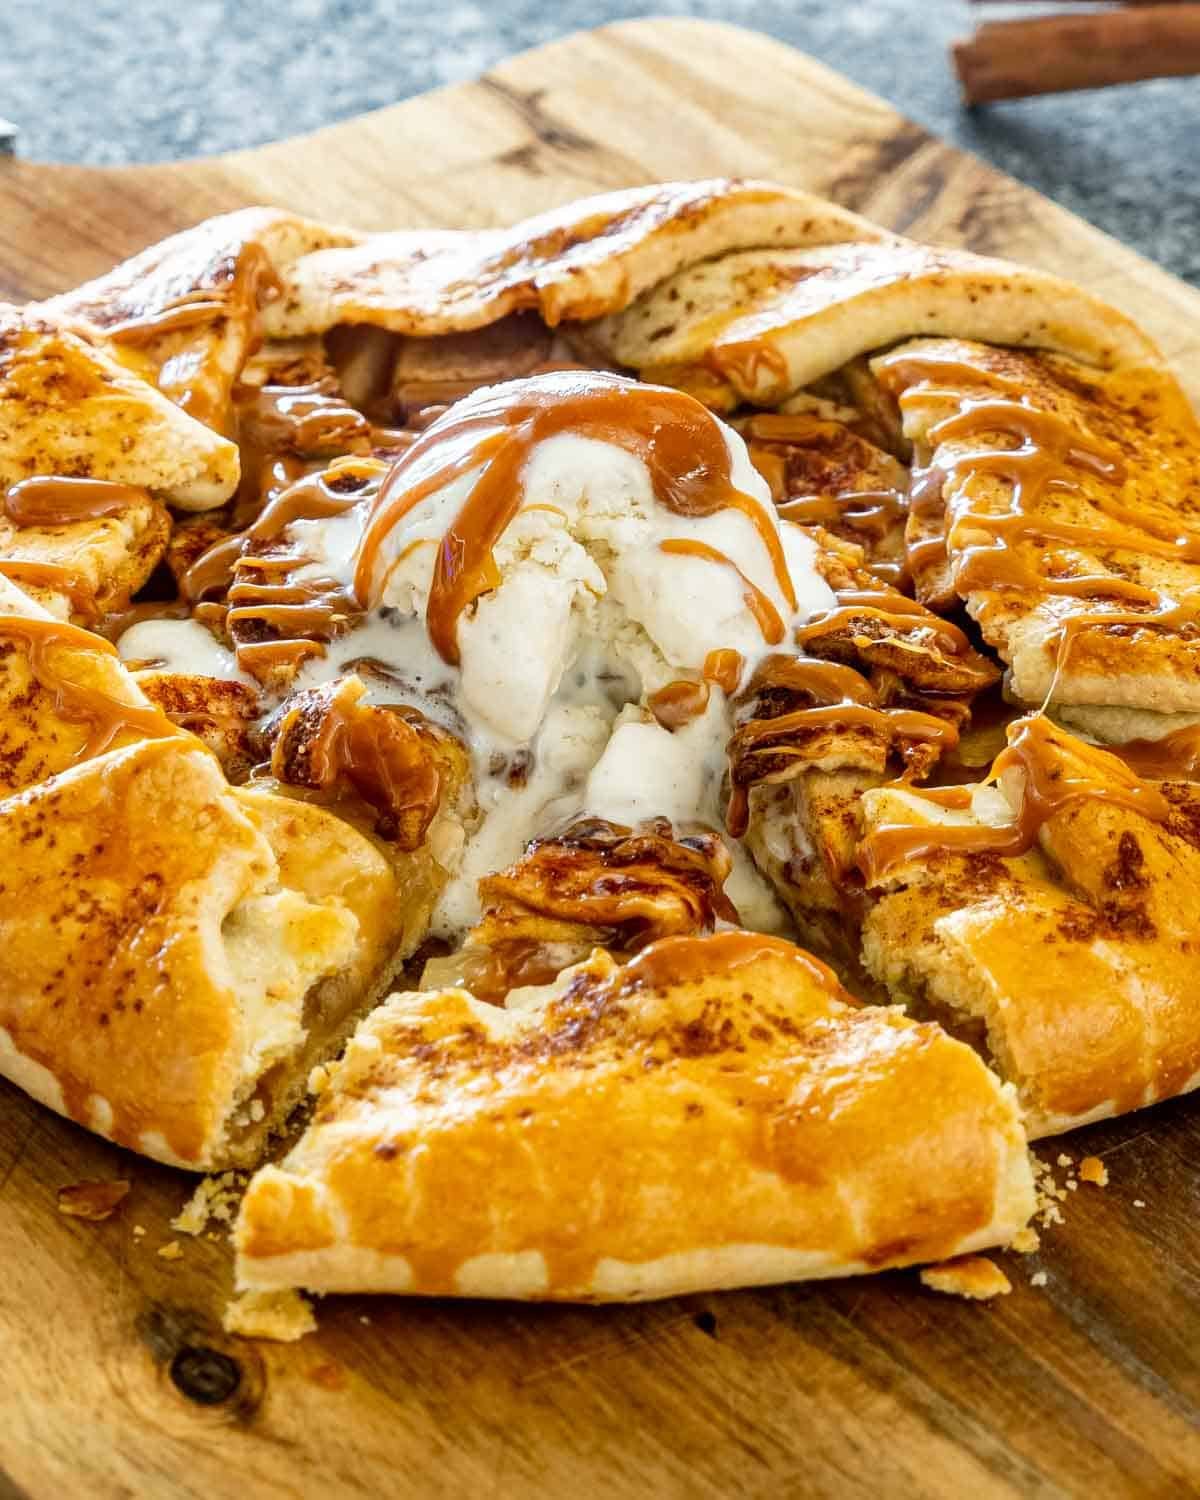 an apple galette with a scoop of ice cream and caramel topping with a slice cut out.